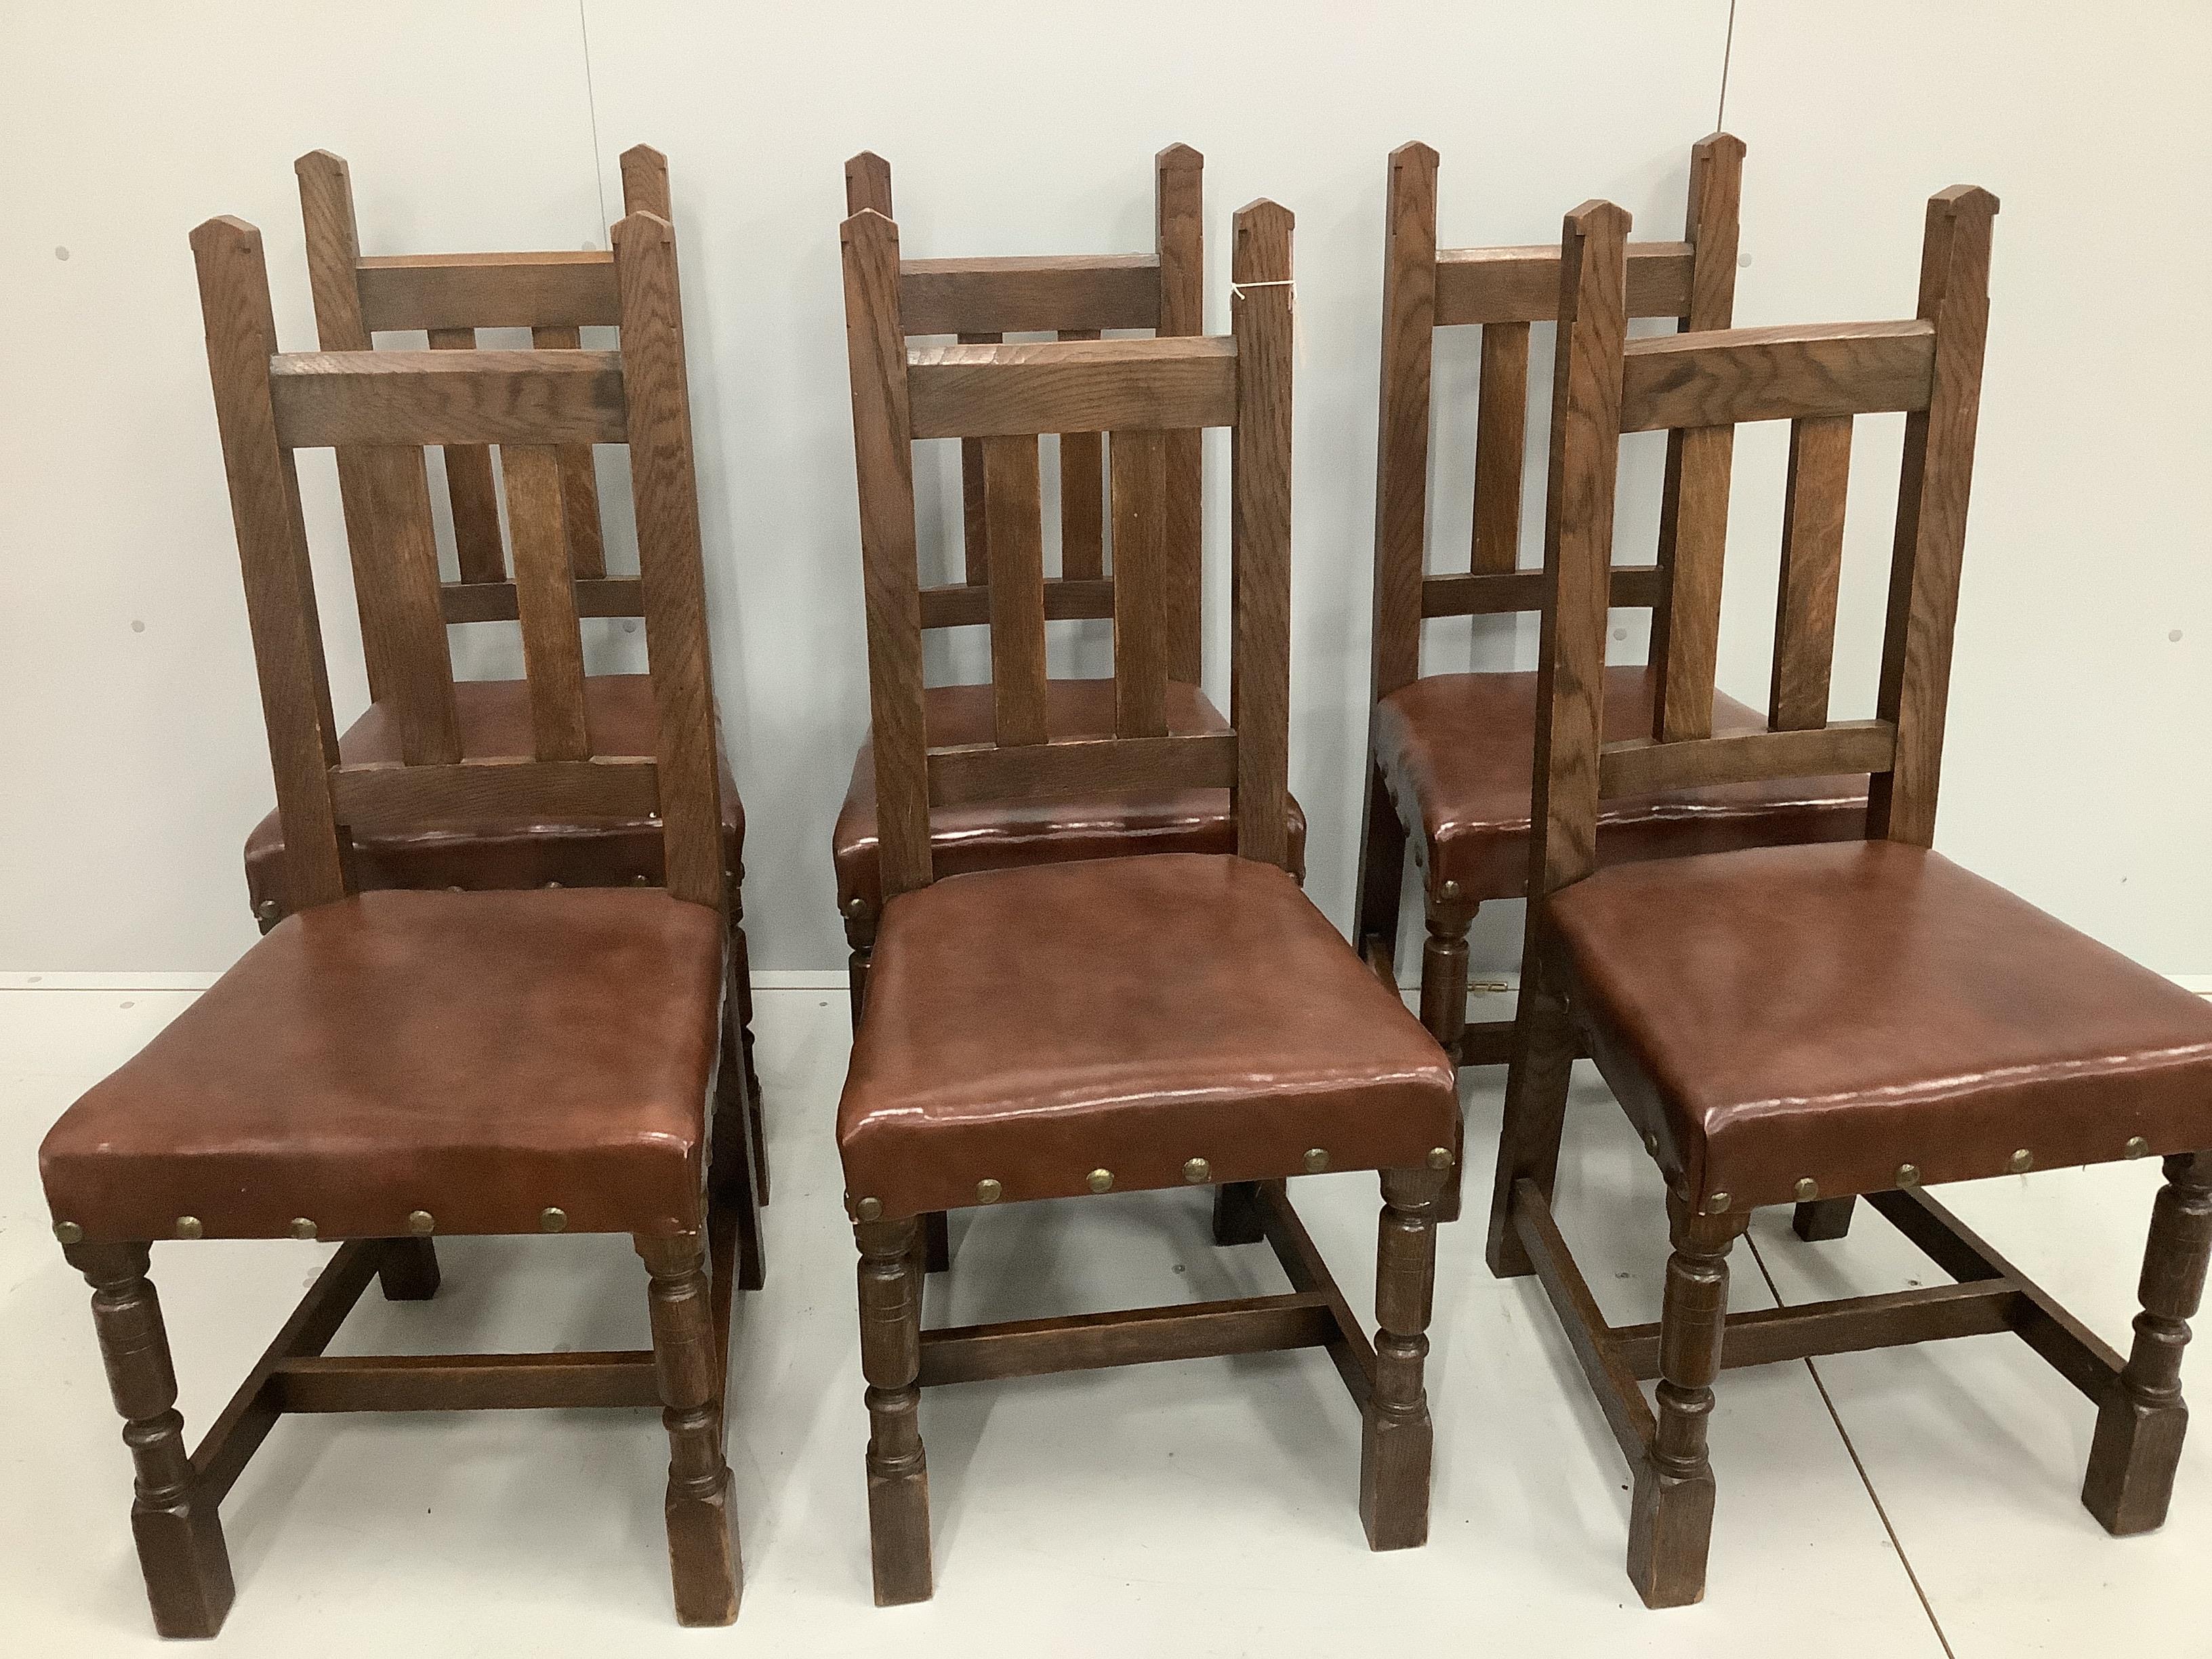 A set of six early 20th century oak dining chairs with leatherette seats, width 46cm, height 103cm